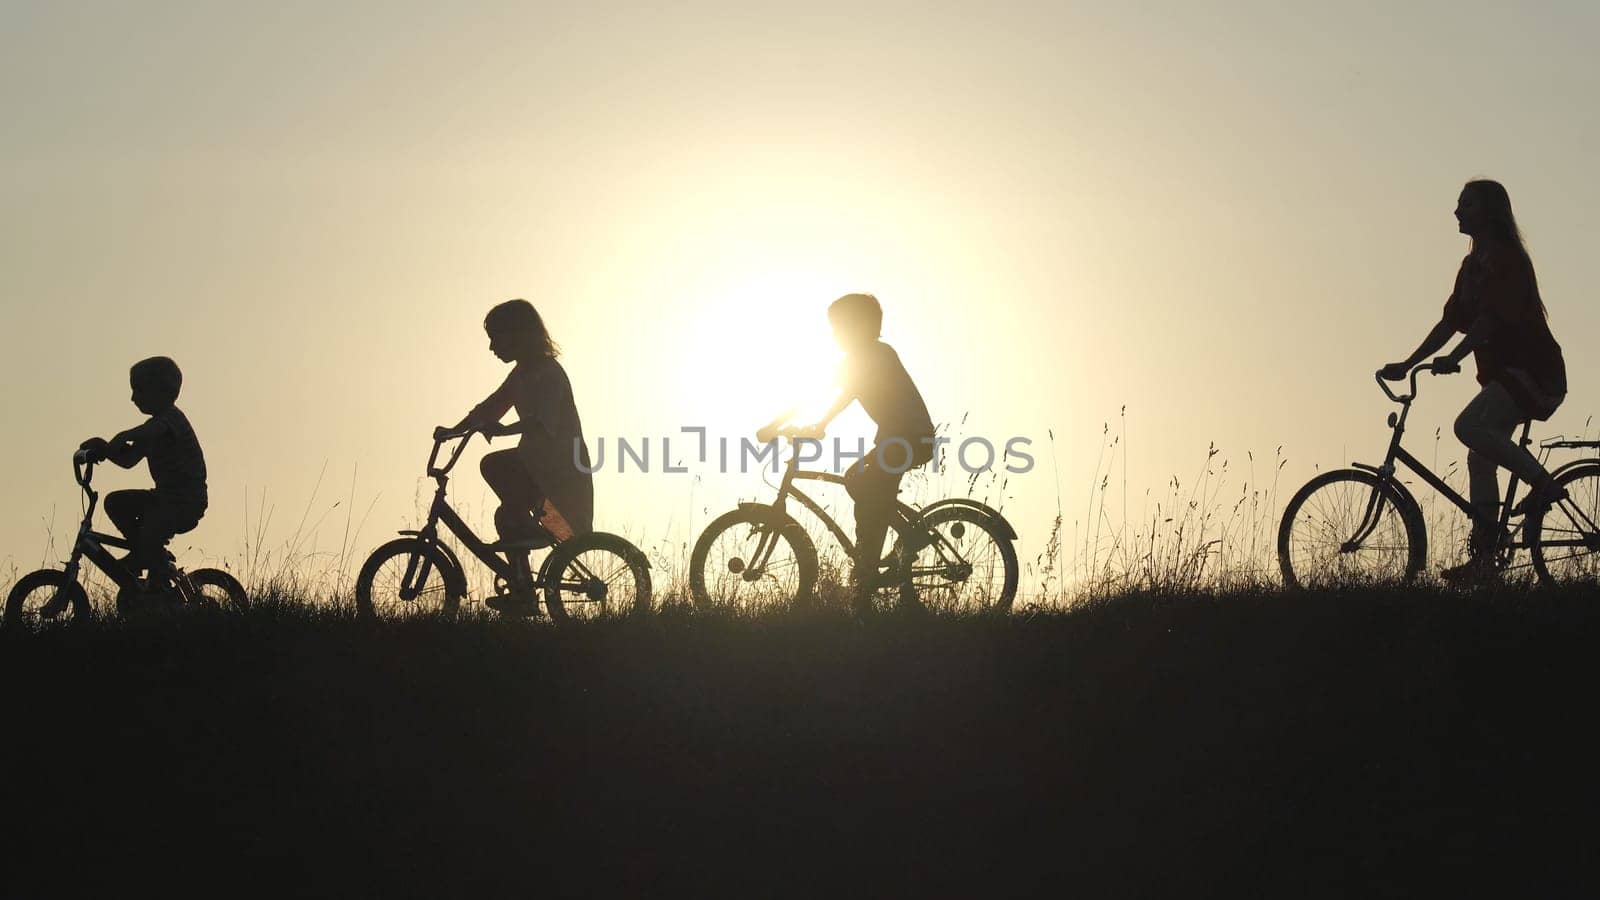 Silhouettes of a large large family on bicycles at sunset. by DovidPro